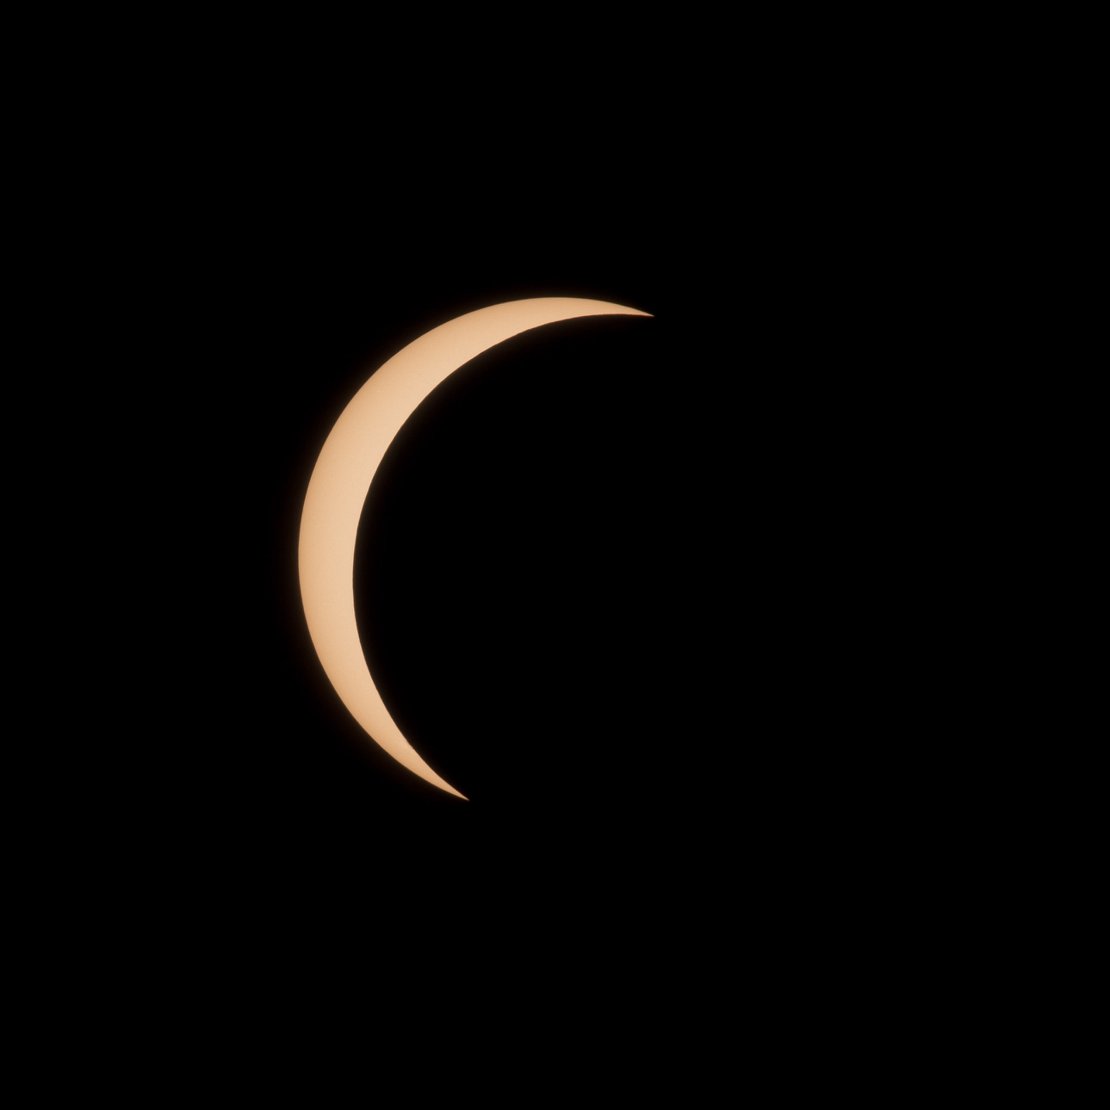 86.9% Solar Eclipse 2017 from Vancouver - Maximum